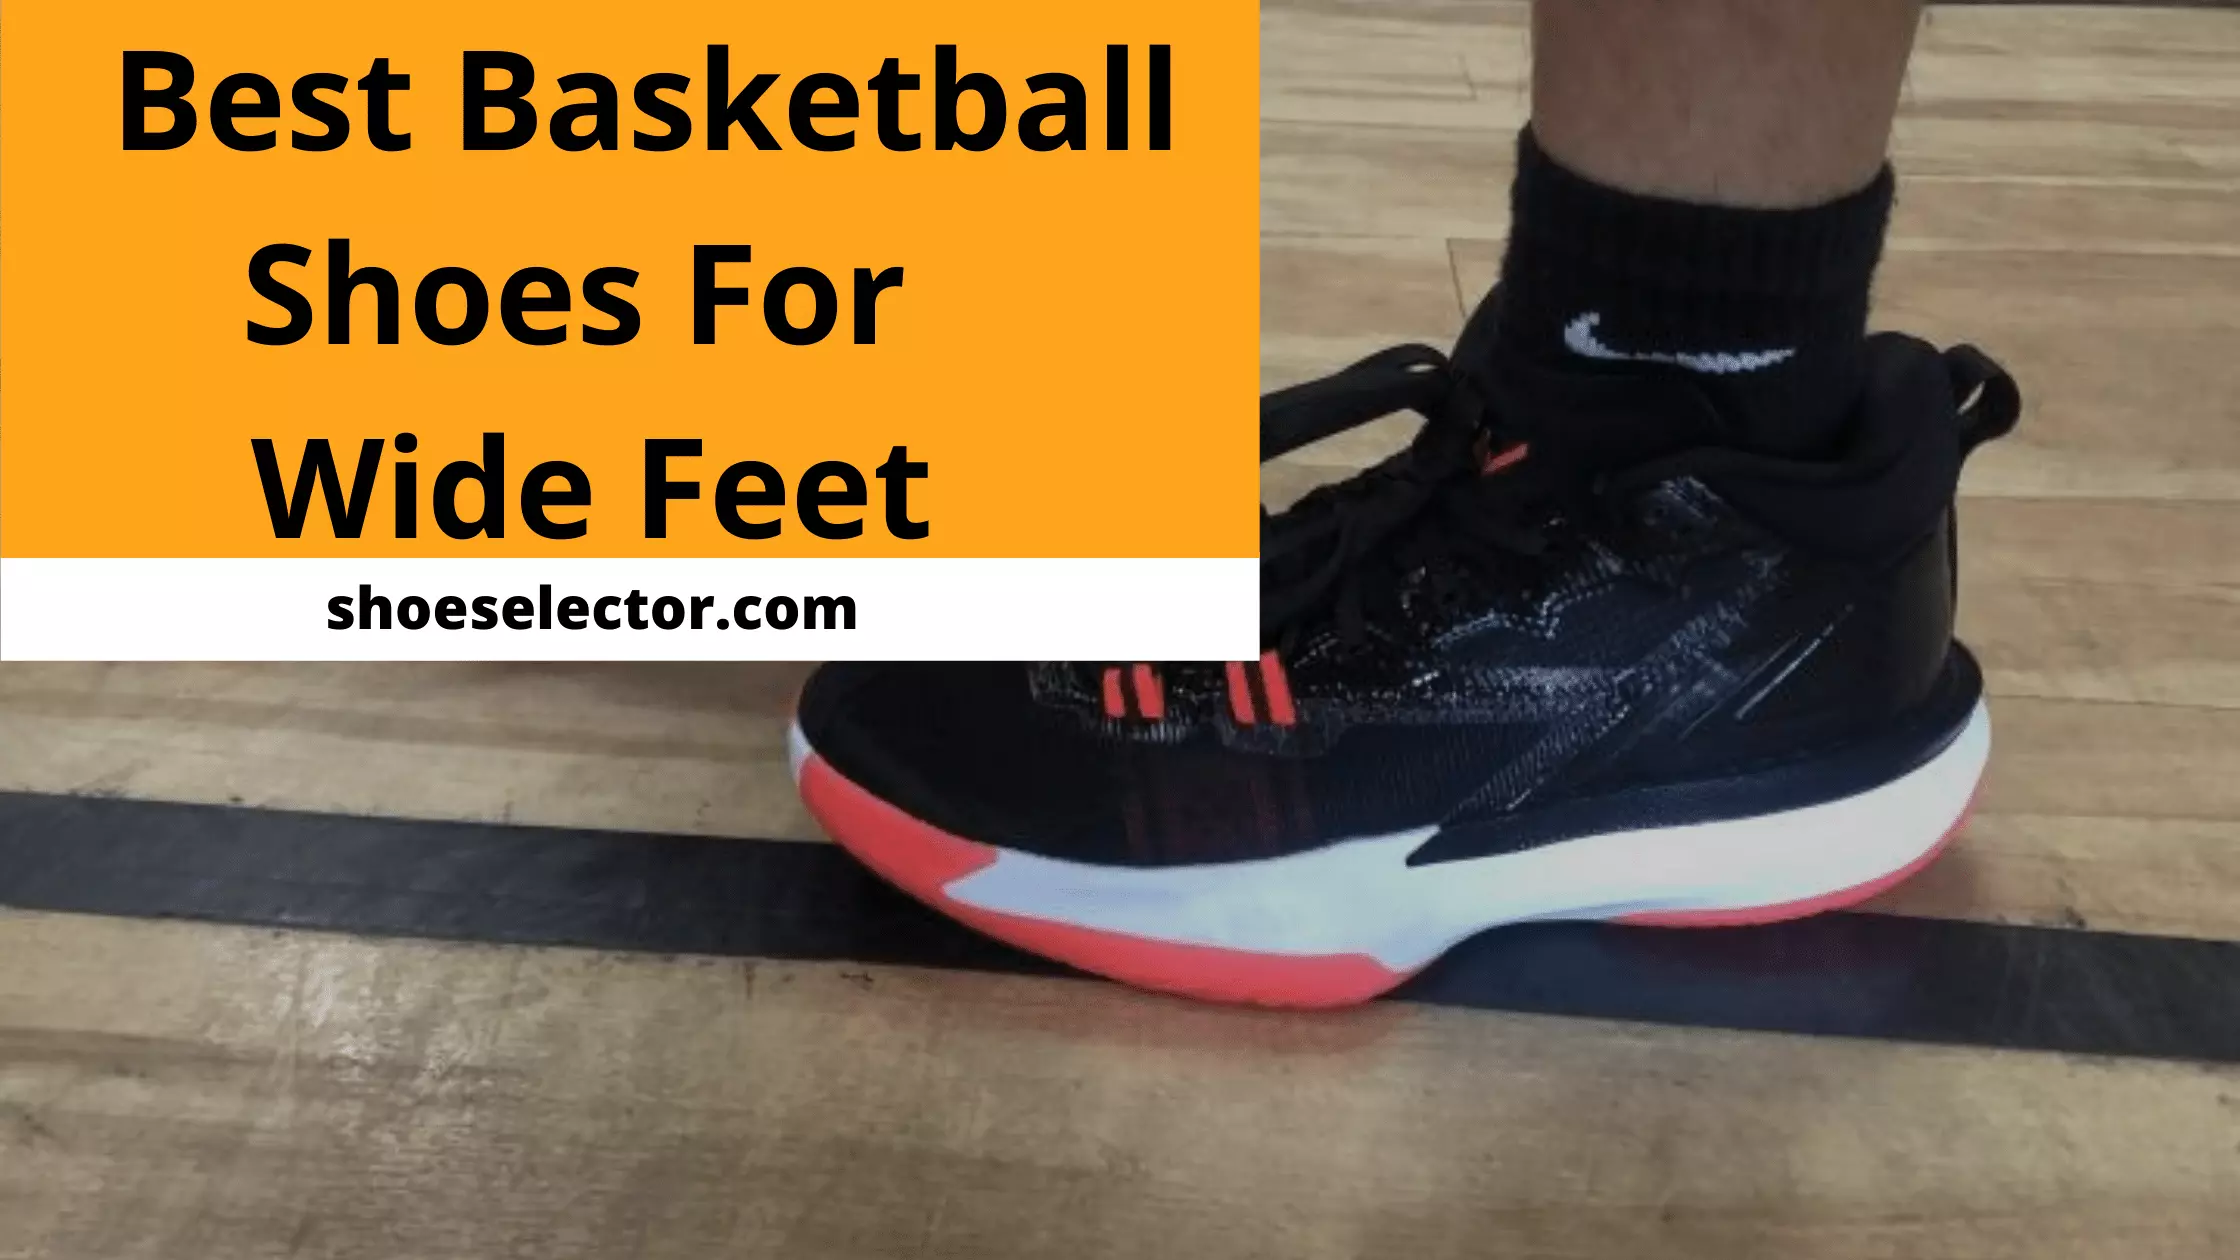 Best Basketball Shoes For Wide Feet - Latest Guide